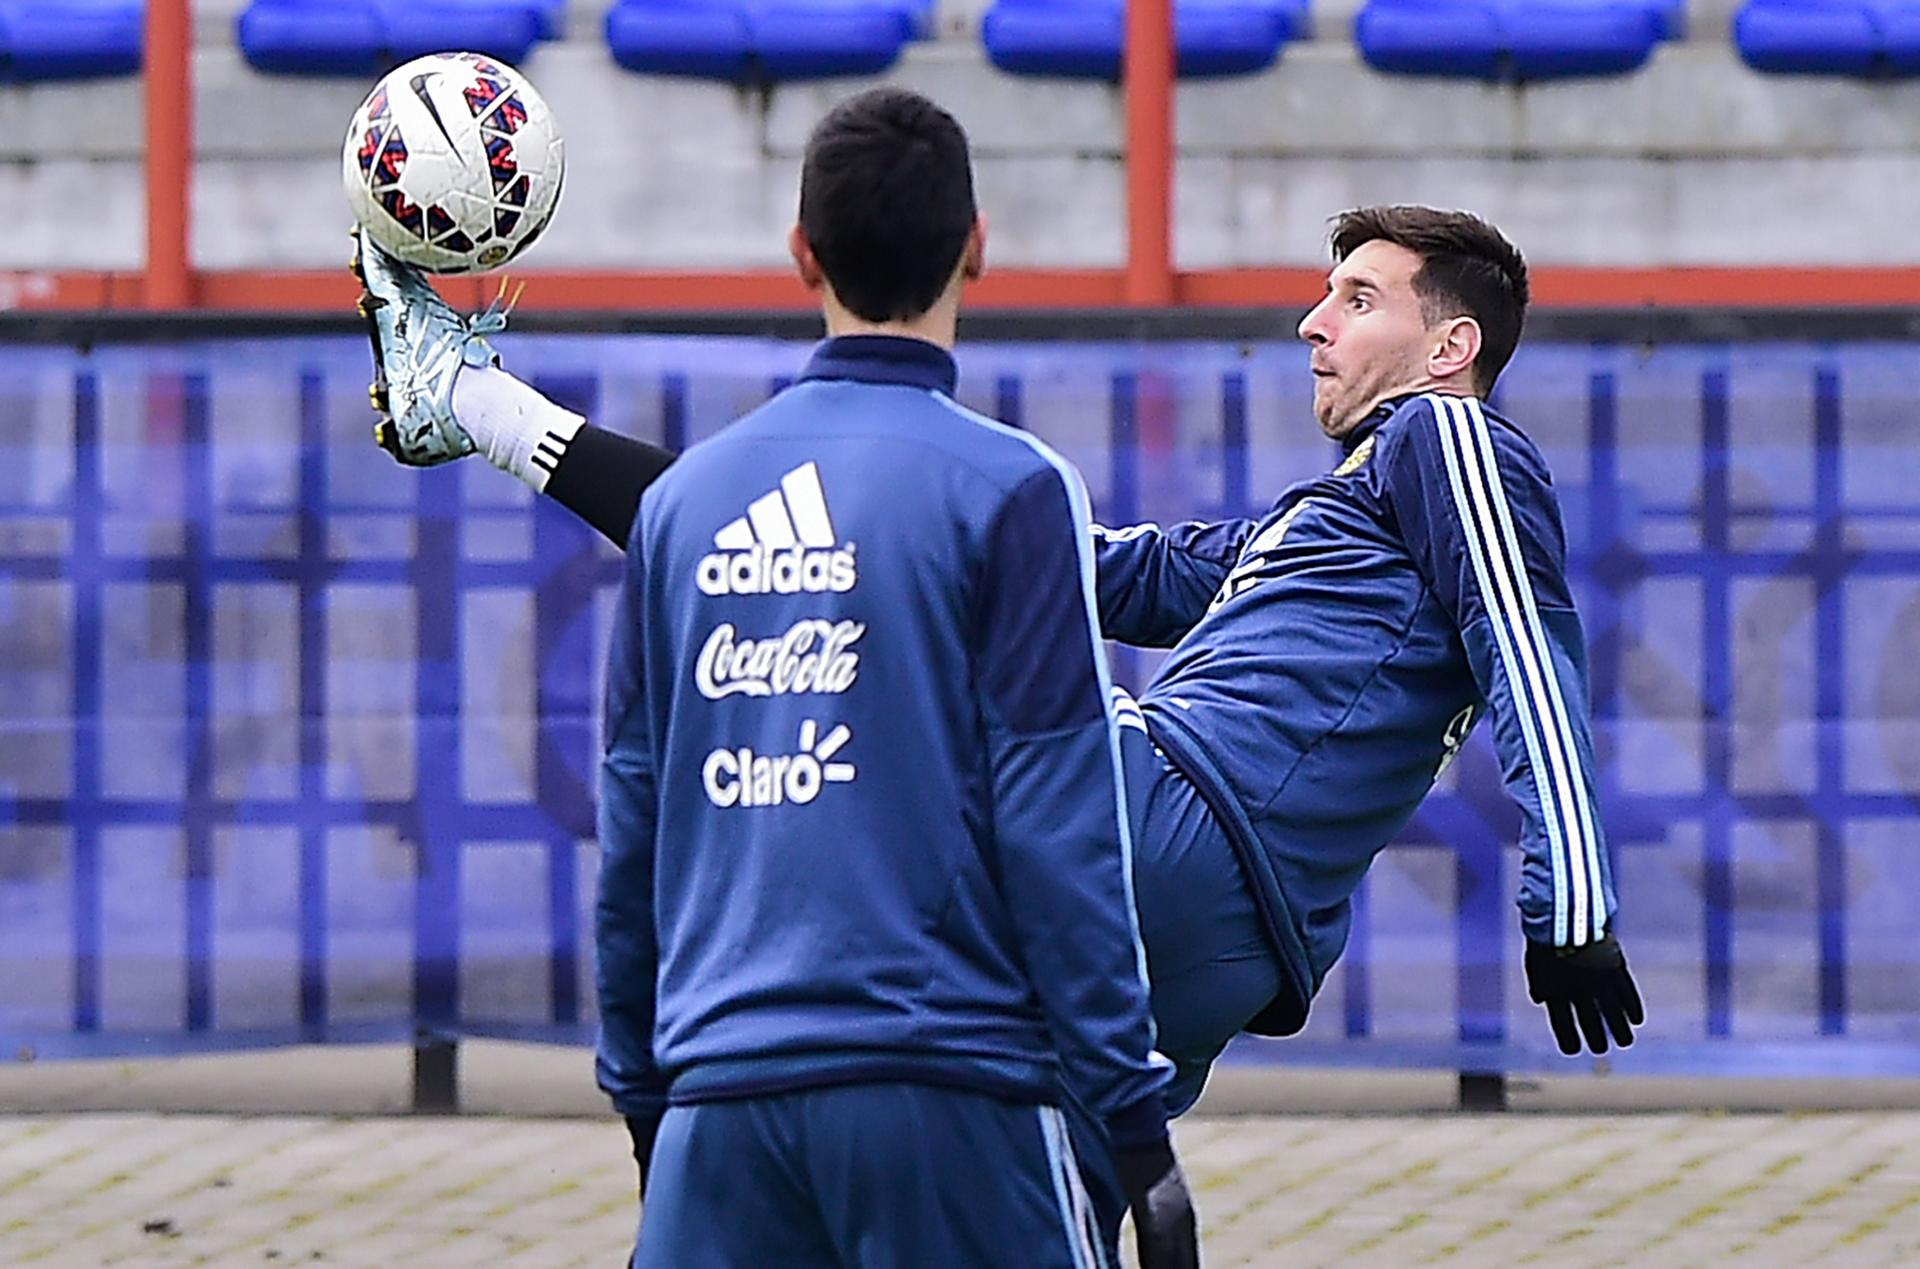 Argentina forward Lionel Messi takes part in a training session in Concepcion ahead of their final against the hosts in Santiago. Photo: AFP